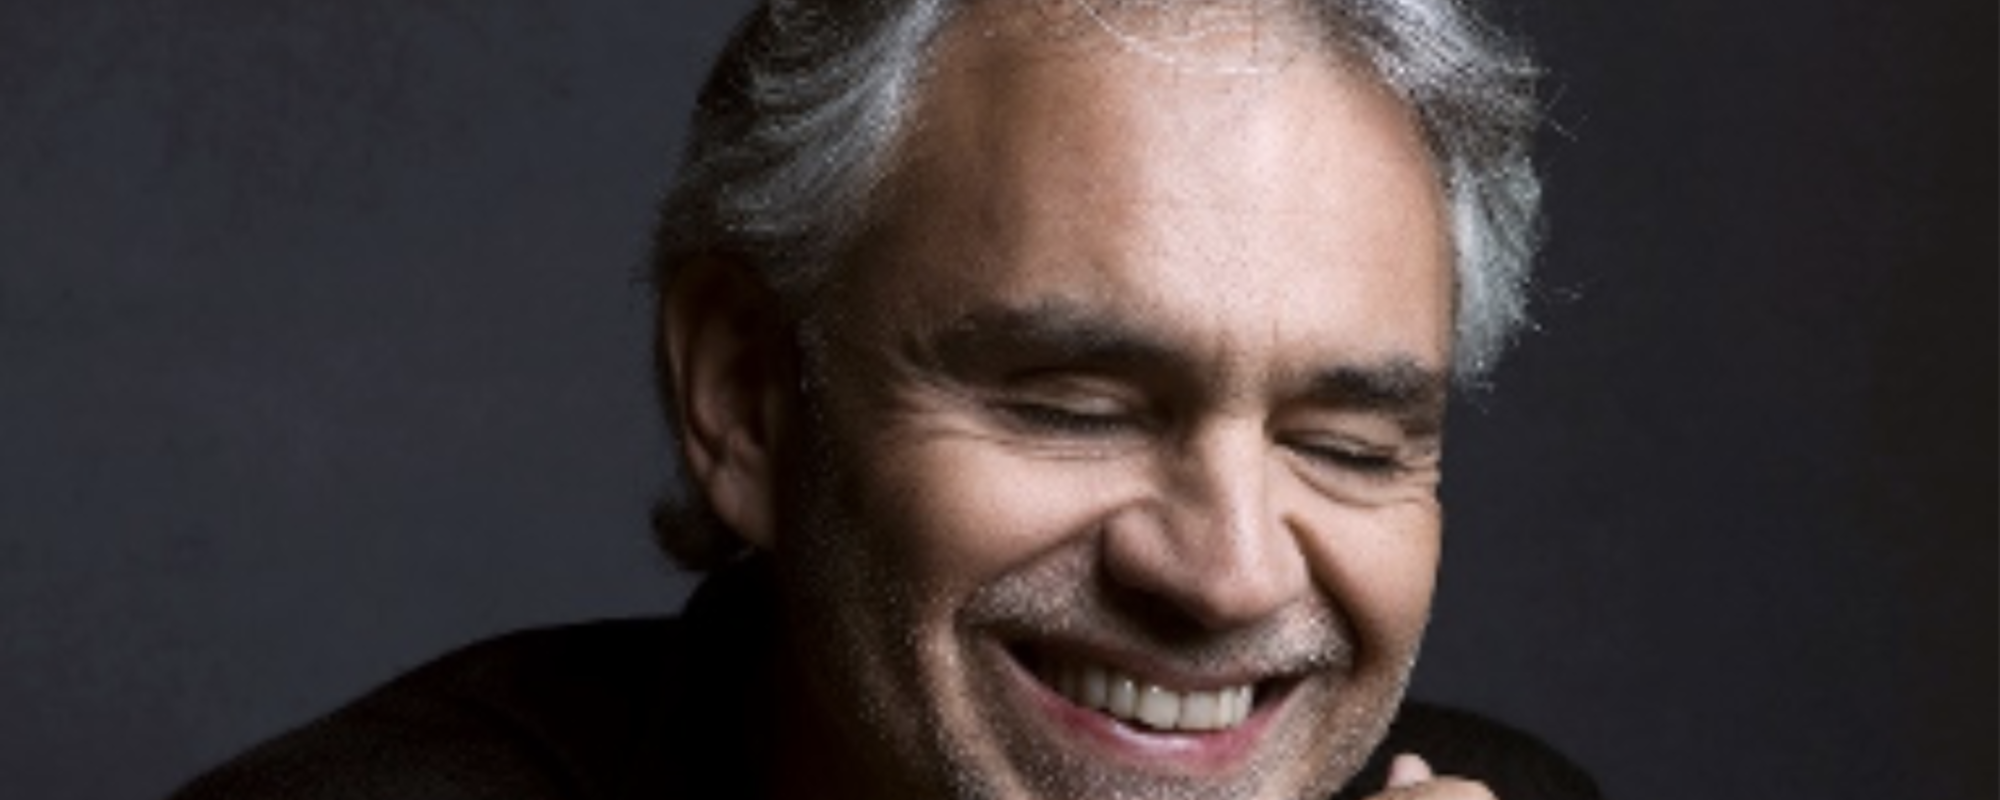 Andrea Bocelli to Perform at The Queen’s Platinum Jubilee Alongside Alicia Keys,  Sir Elton John, and More